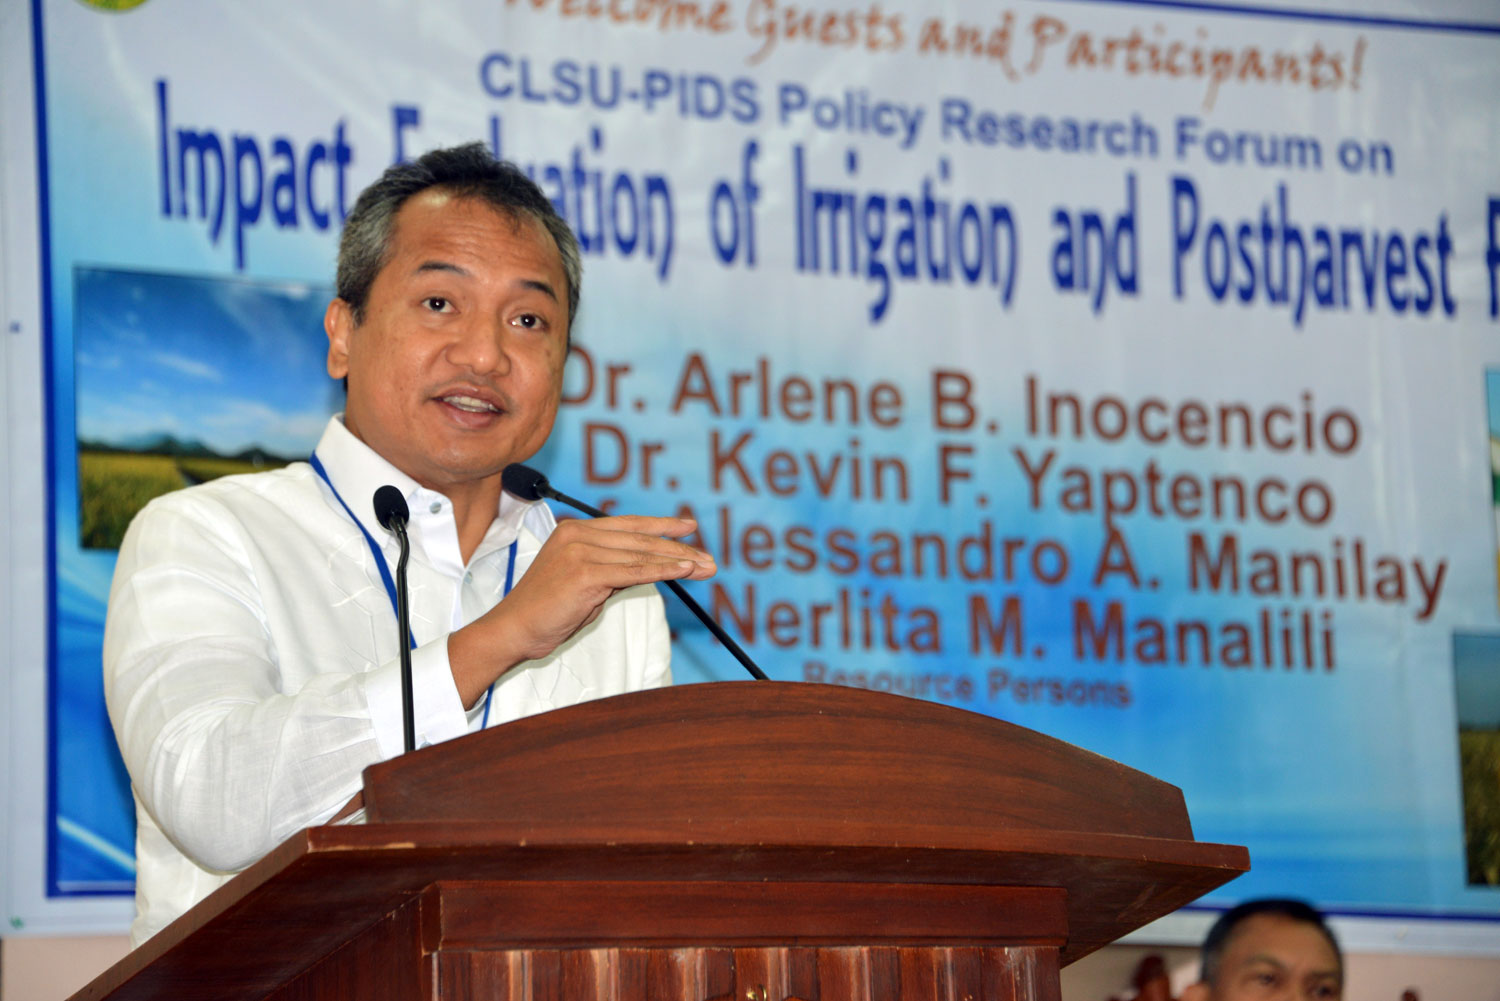 PIDS-CLSU Forum On Impact Evaluation Of Irrigation And Postharvest Facilities-DSC_5757.jpg